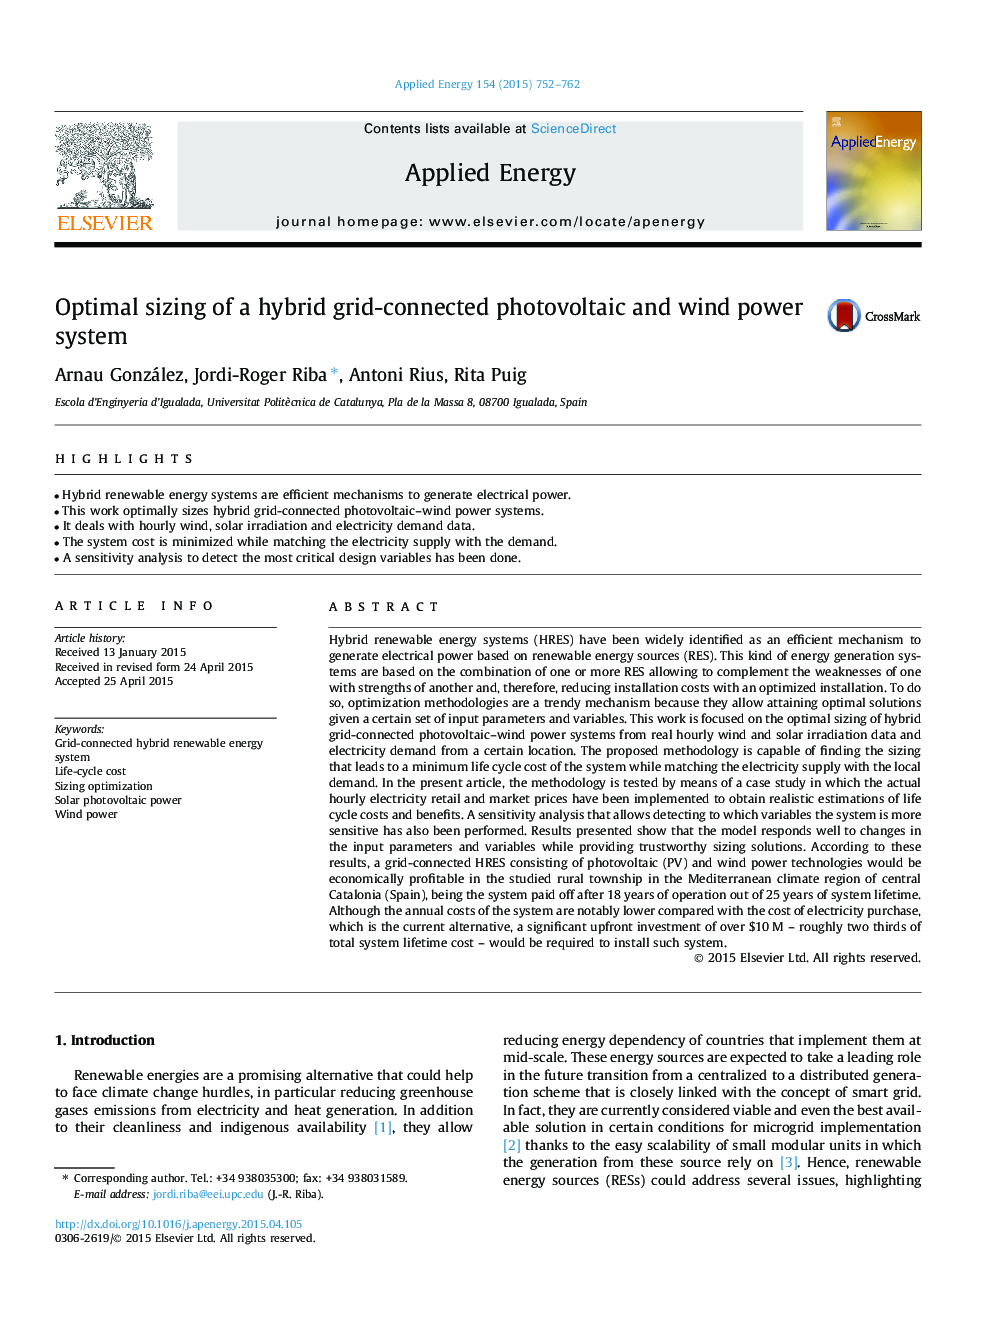 Optimal sizing of a hybrid grid-connected photovoltaic and wind power system